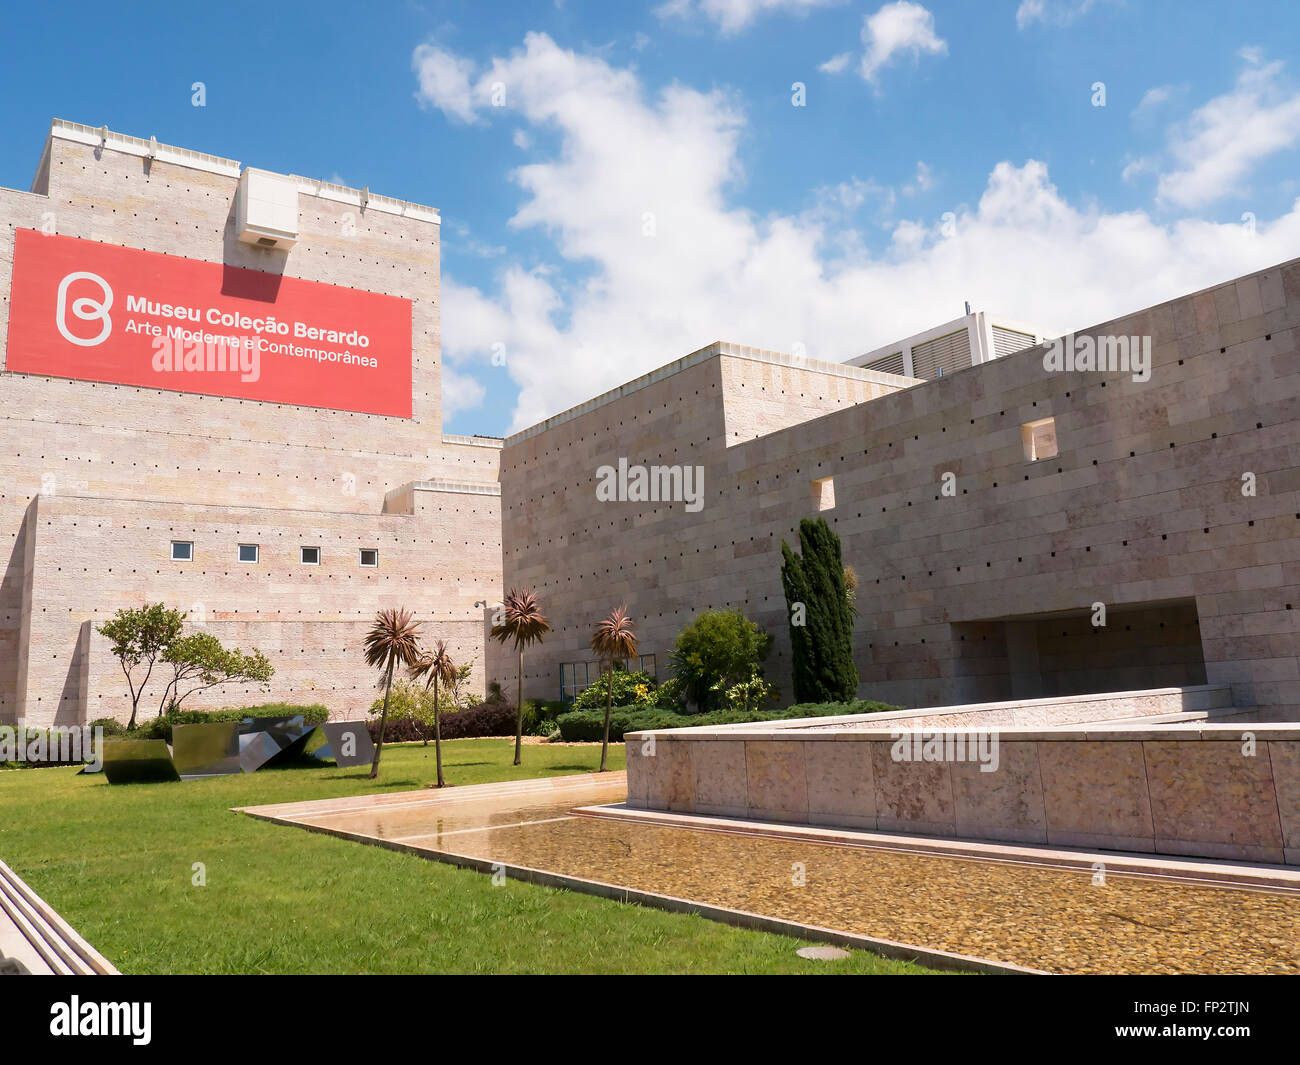 The Gallery of Contemporary Art in Belem Lisbon,Portugal Stock Photo